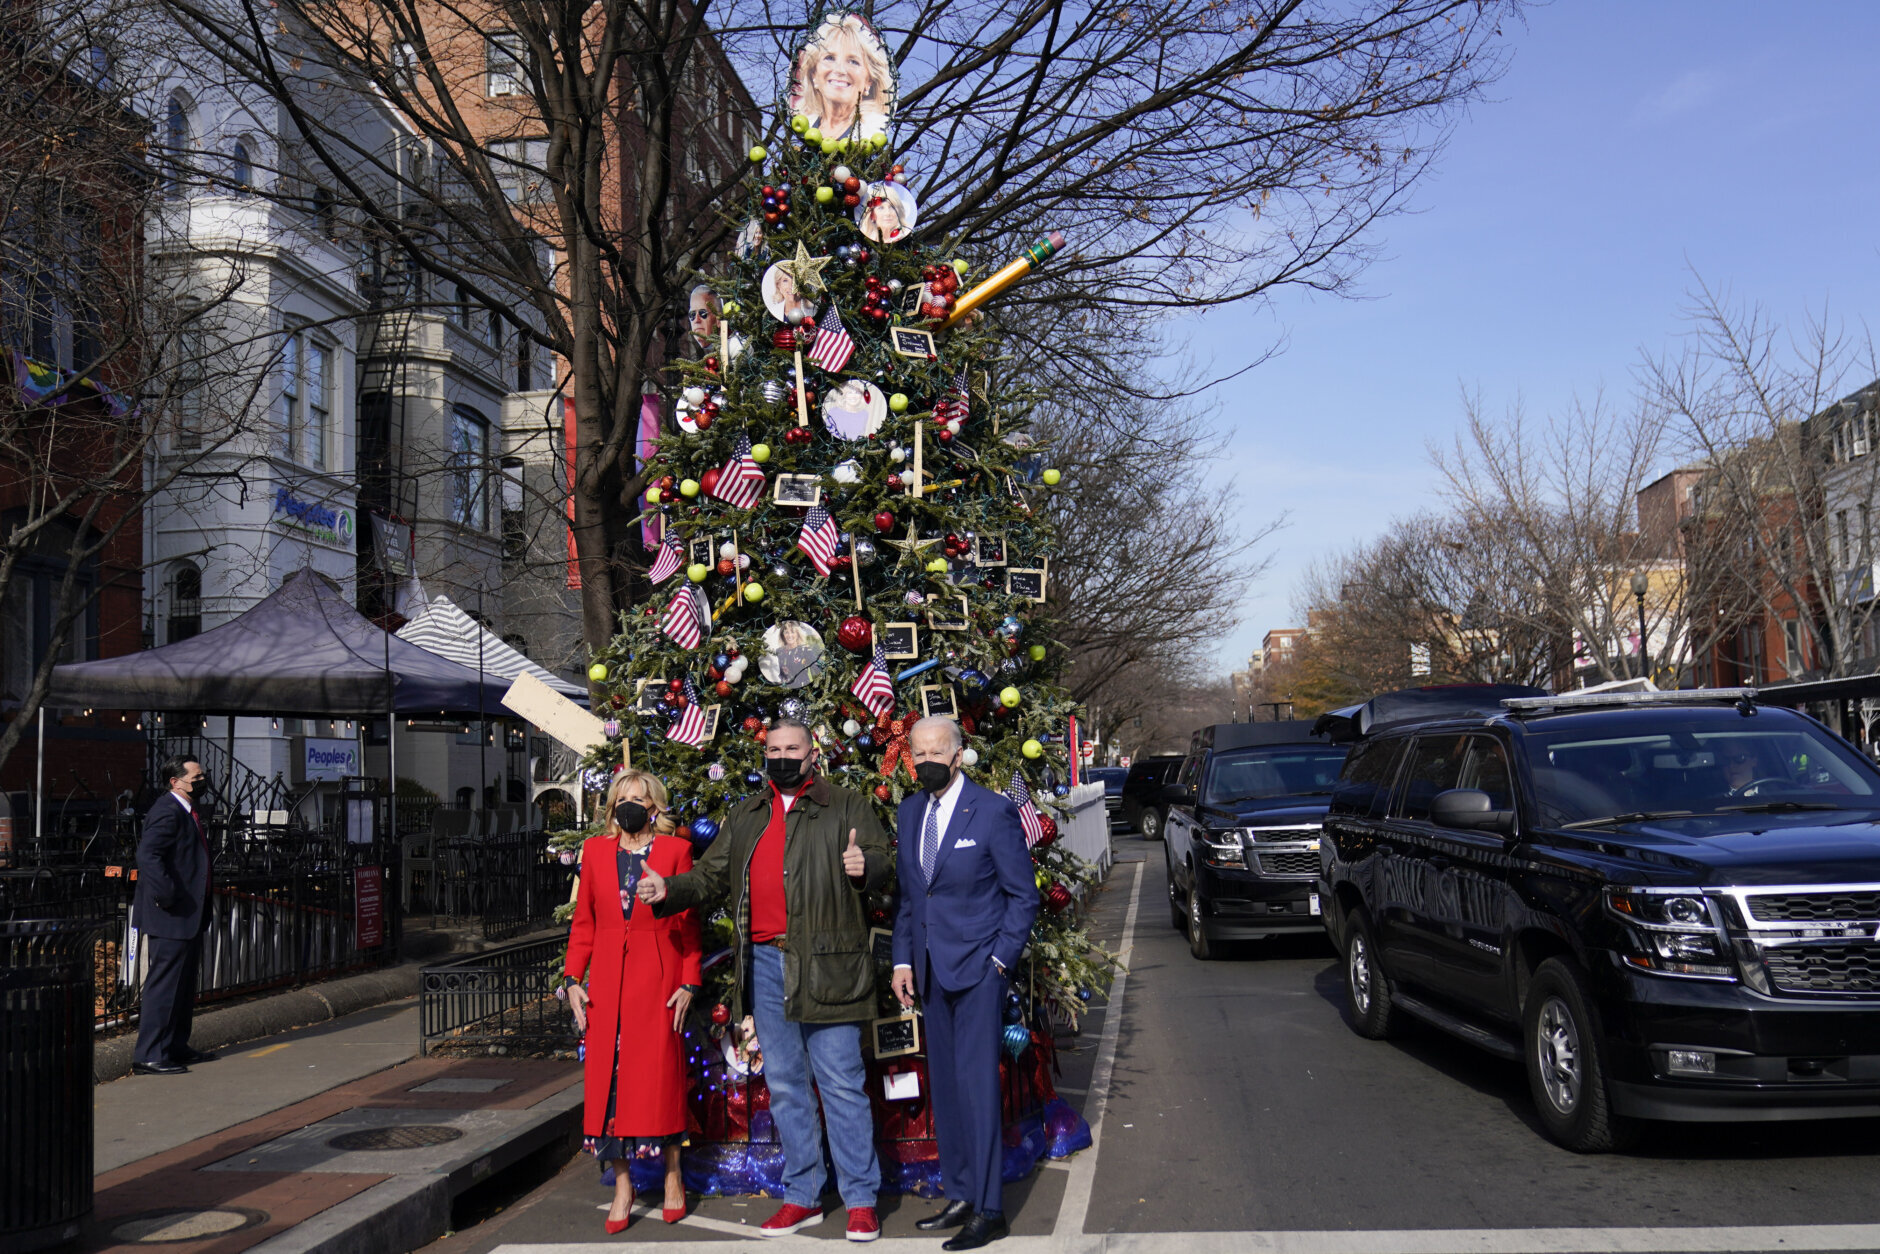 President Joe Biden and first lady Jill Biden pose for a photo with Dito Sevilla near a holiday tree at the Italian restaurant Floriana in Washington, Friday, Dec. 24, 2021. Since 2012 outside the restaurant, a holiday tree with a theme has been decorated and this year's tree has been decorated with images first lady Jill Biden and President Joe Biden. (AP Photo/Carolyn Kaster)